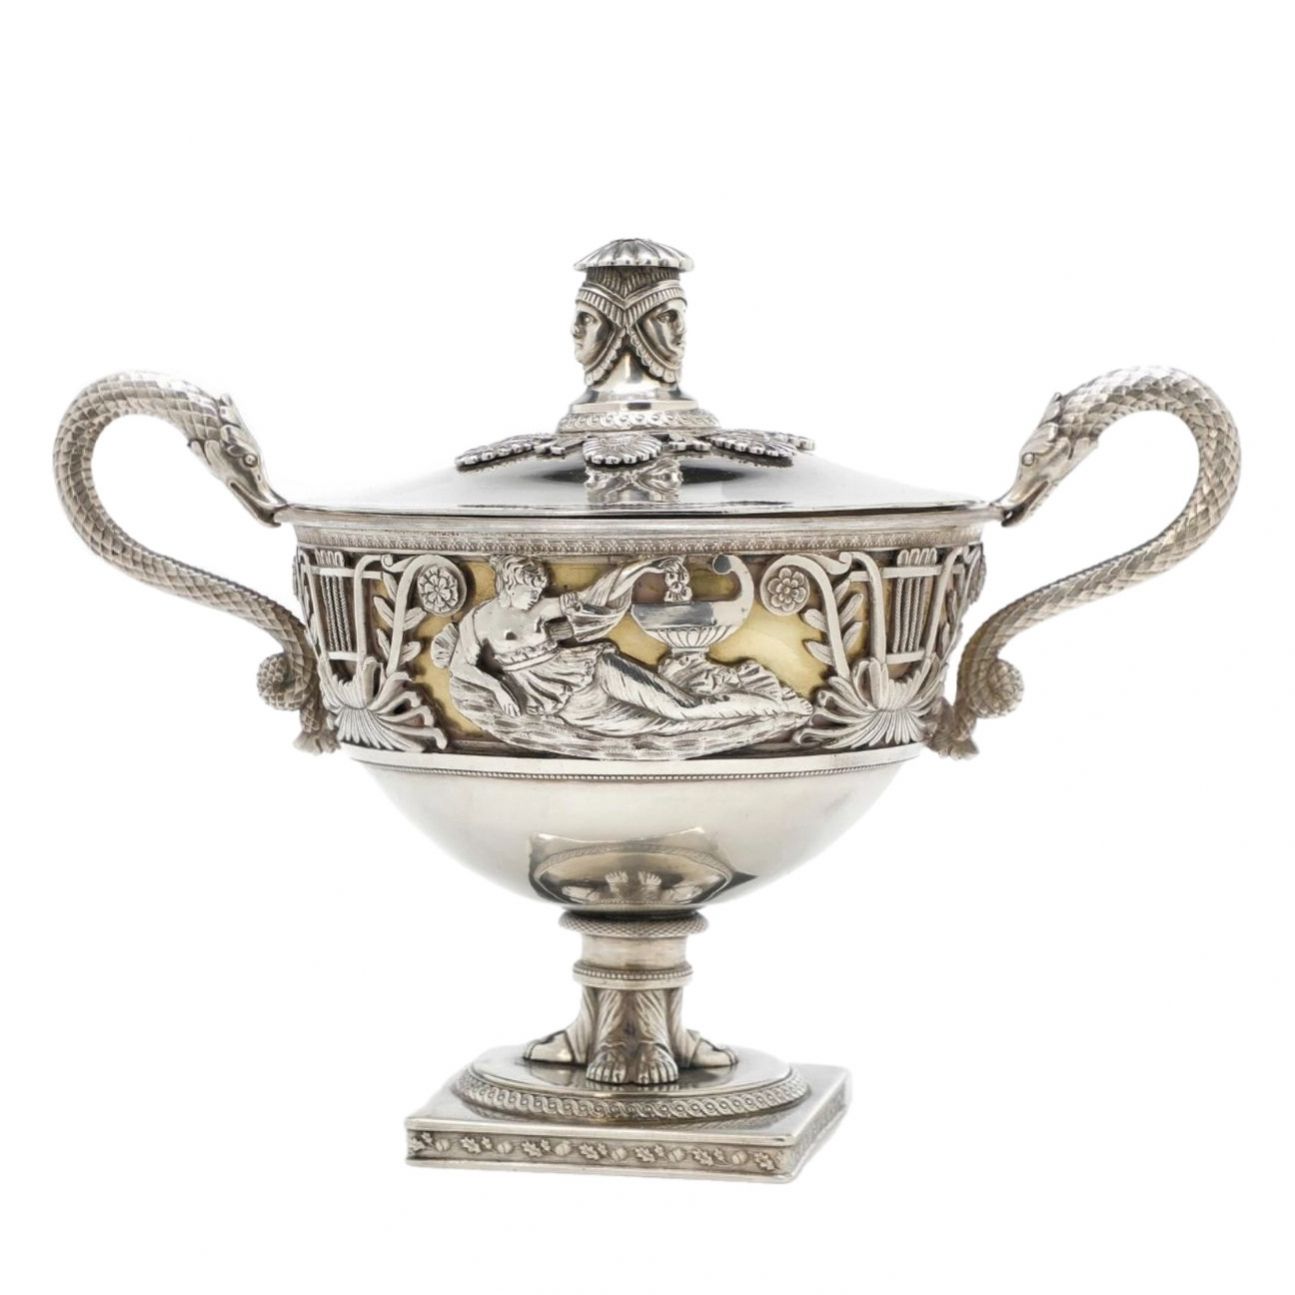 Silver-bonbonniere-Russian-Empire-St-Petersburg-workshop-Axel-Hedlund-Turn-of-the-1819th-century